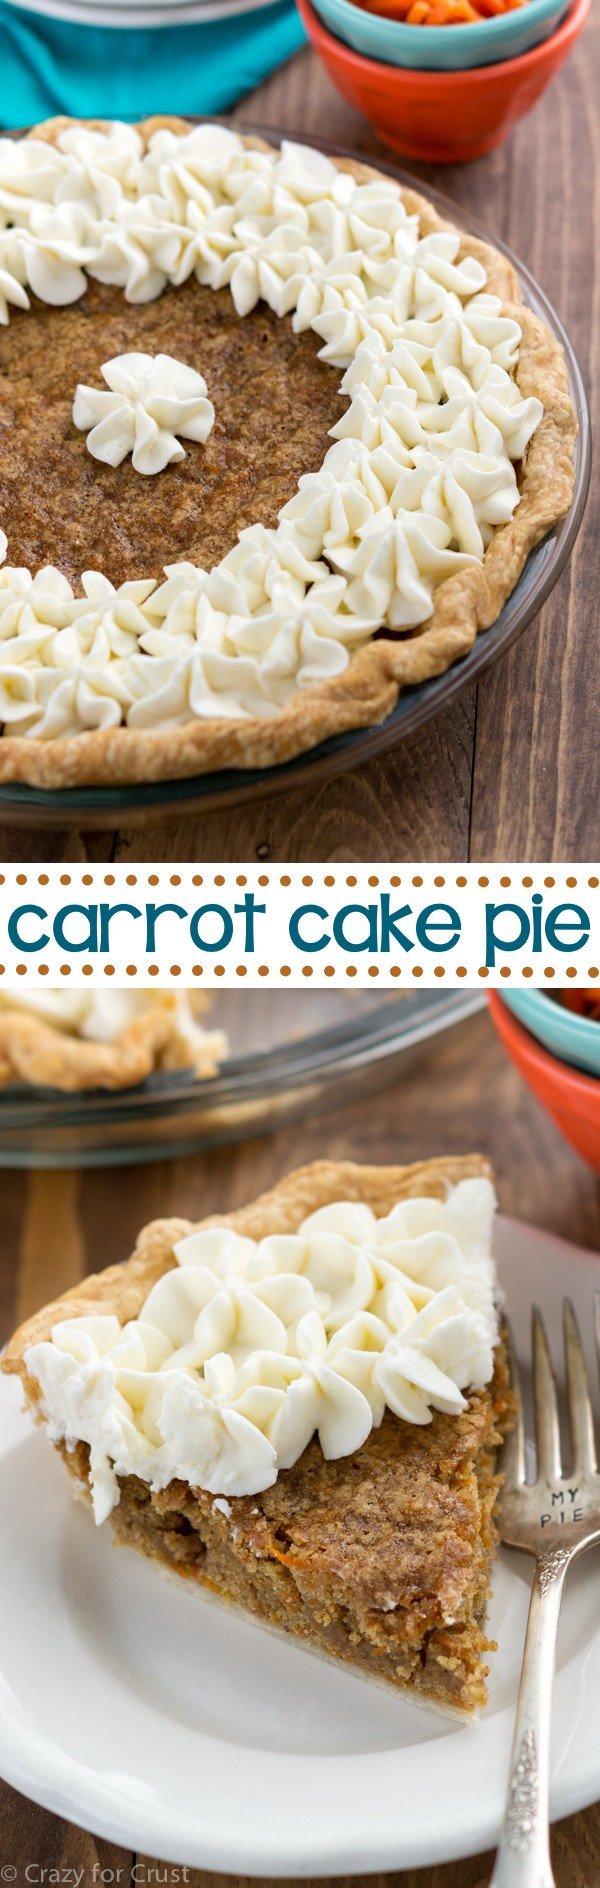 Carrot Cake Pie is an easy dessert recipe that's perfect for carrot cake lovers! It's a carrot cake blondie in a pie crust that's topped with cream cheese whipped cream!